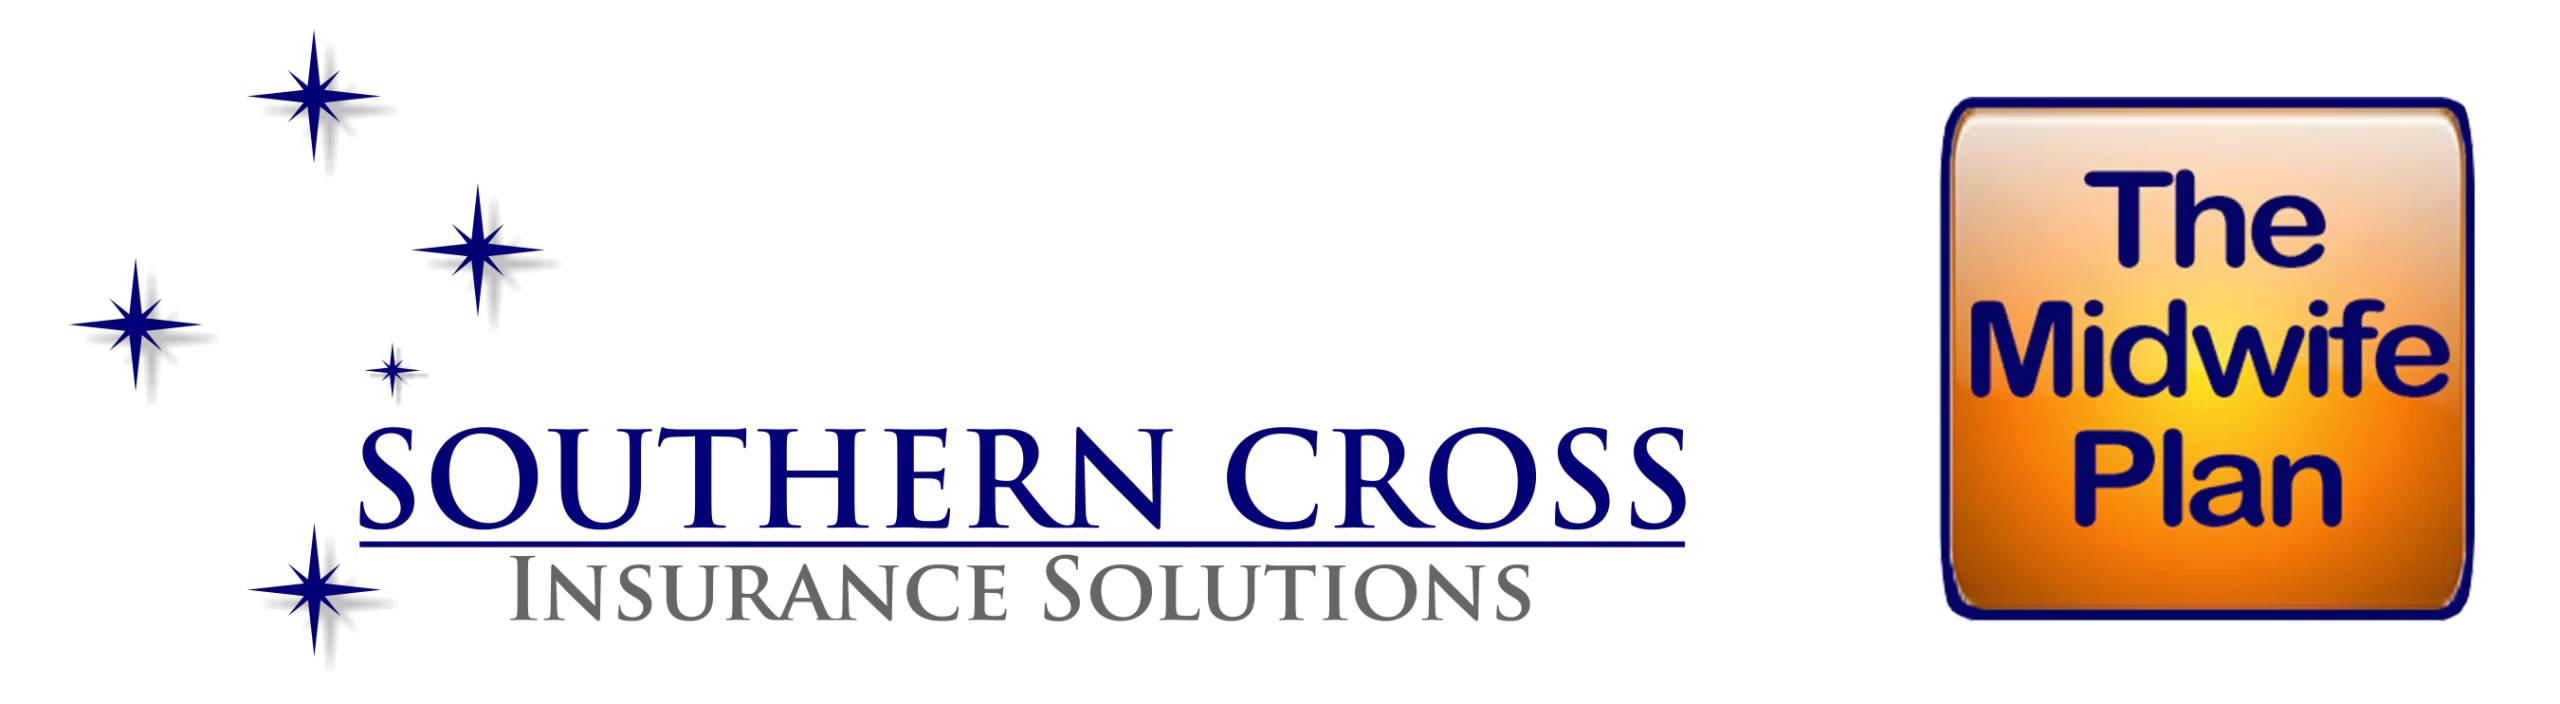 Southern Cross Insurance Solutions